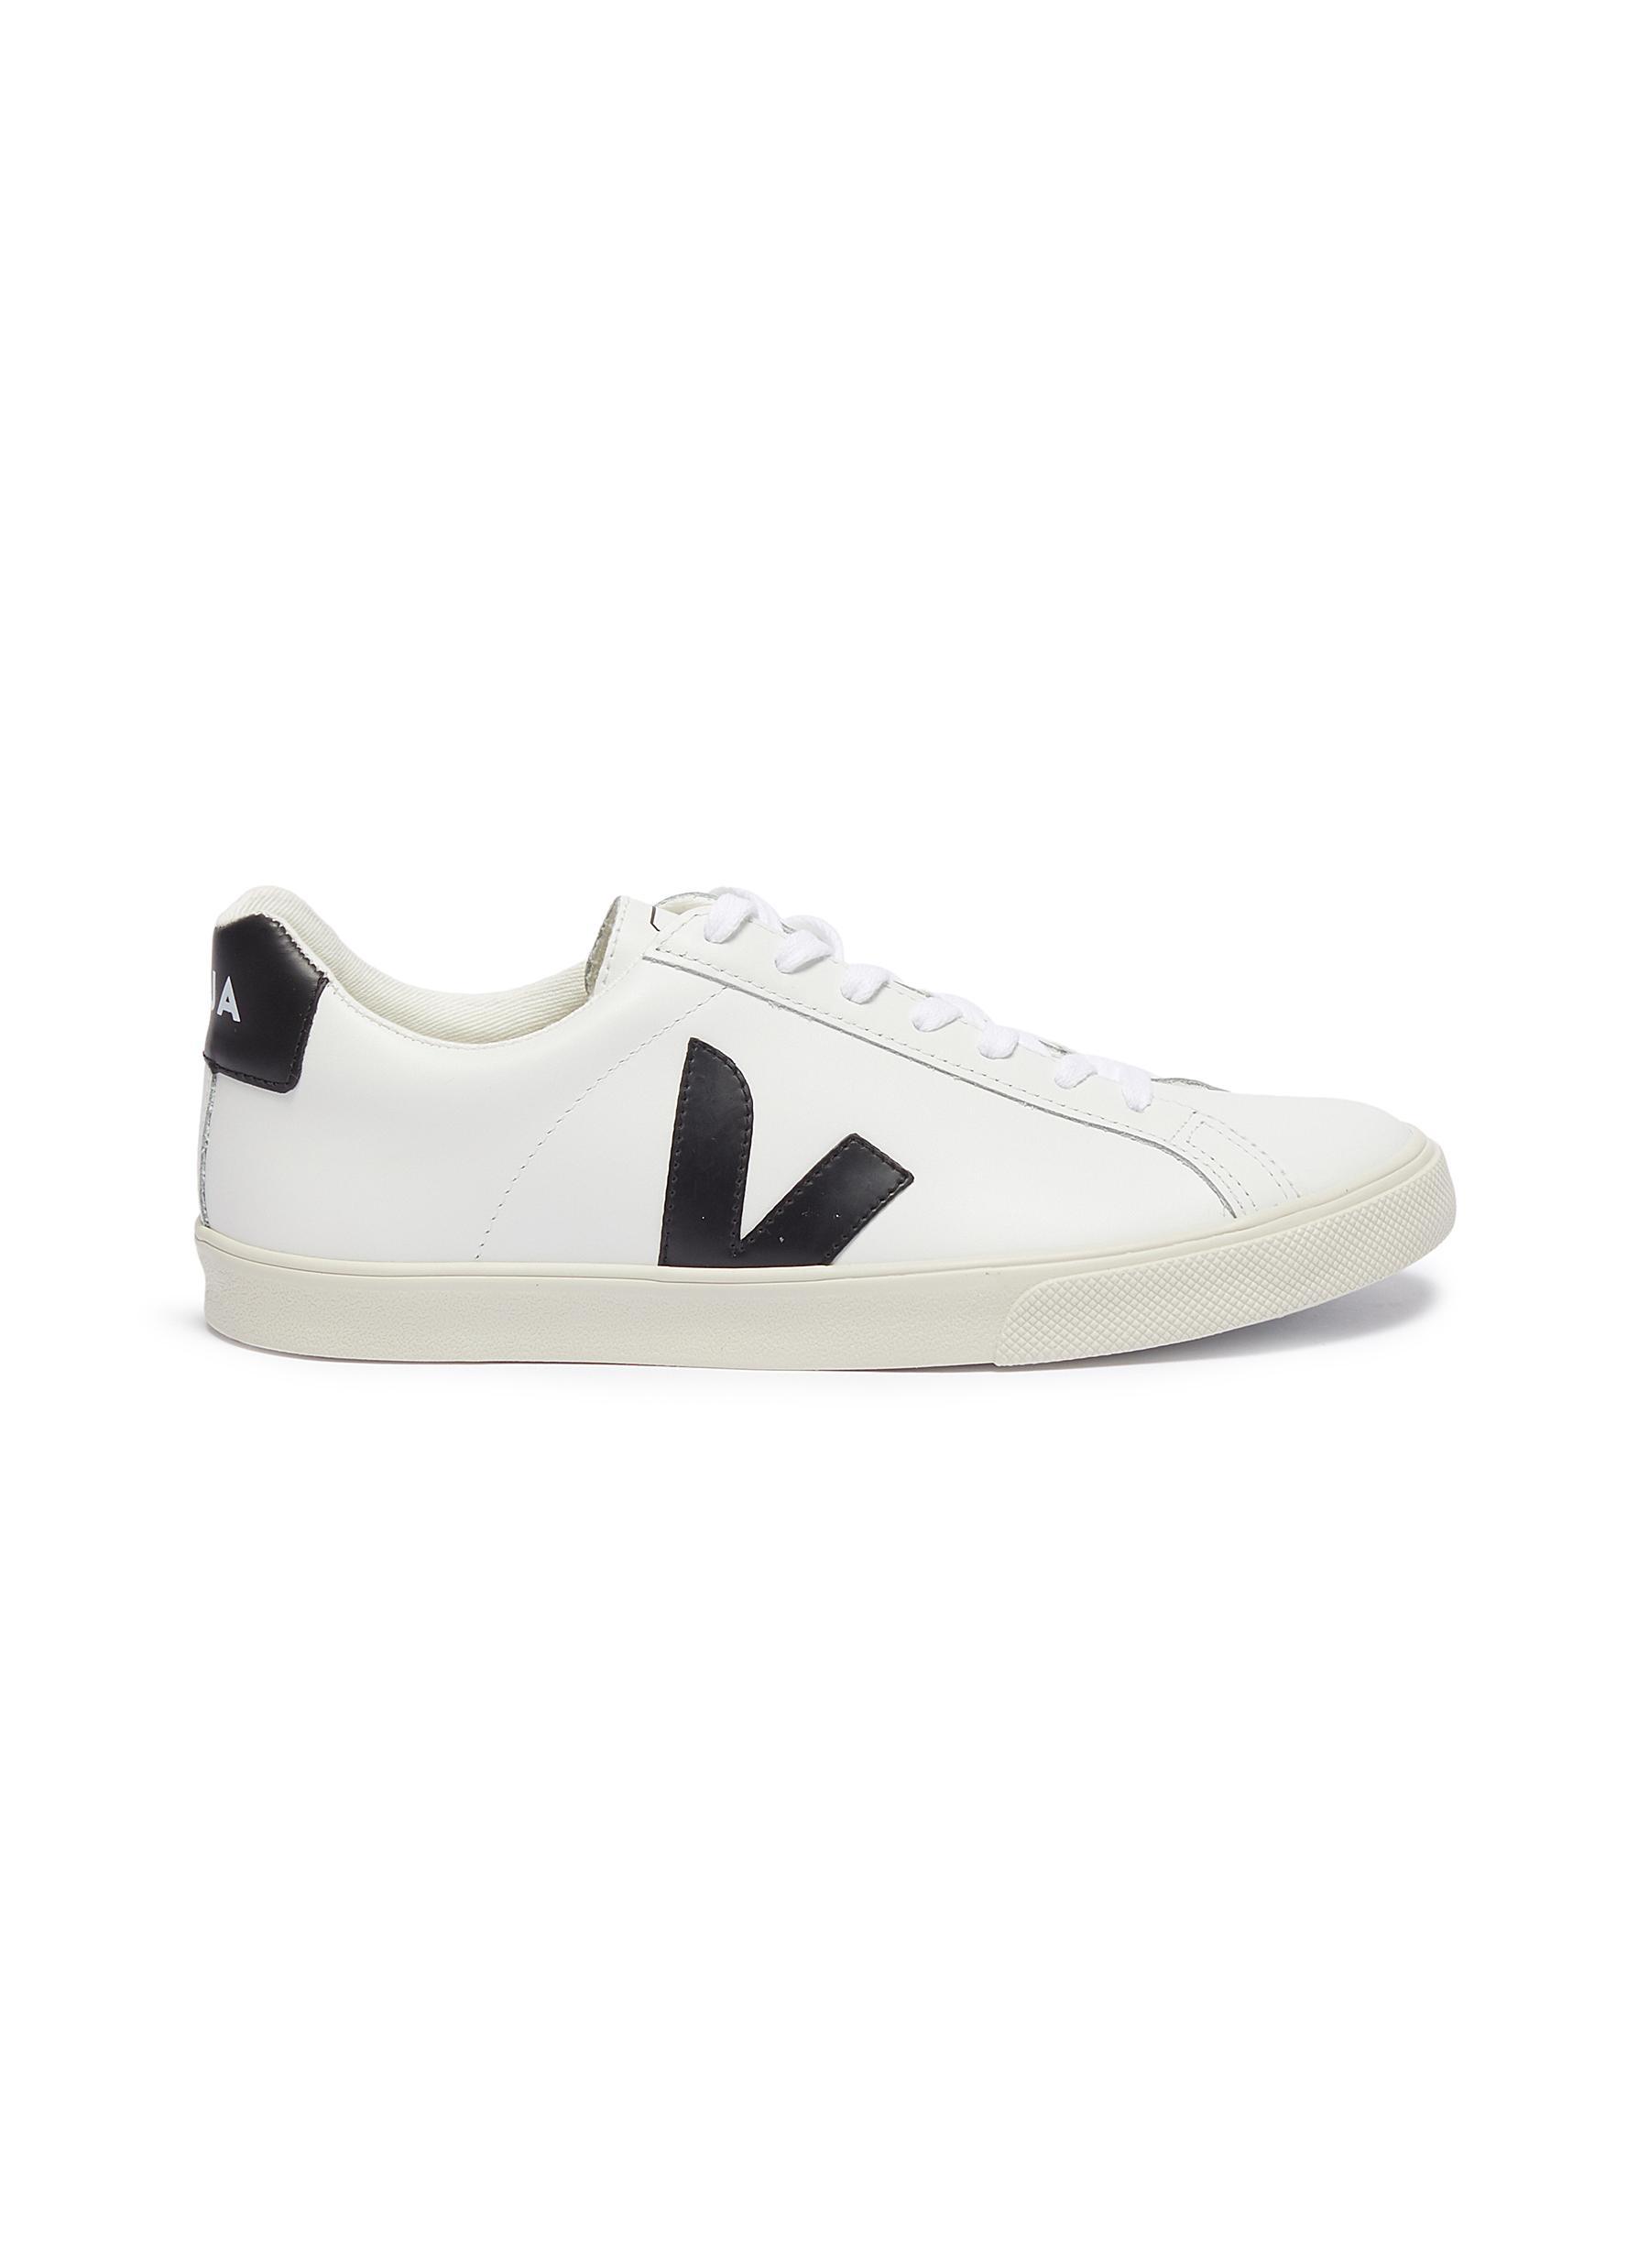 Vejas 'campo' Vegan Leather Sneakers in White / Black (White) - Lyst